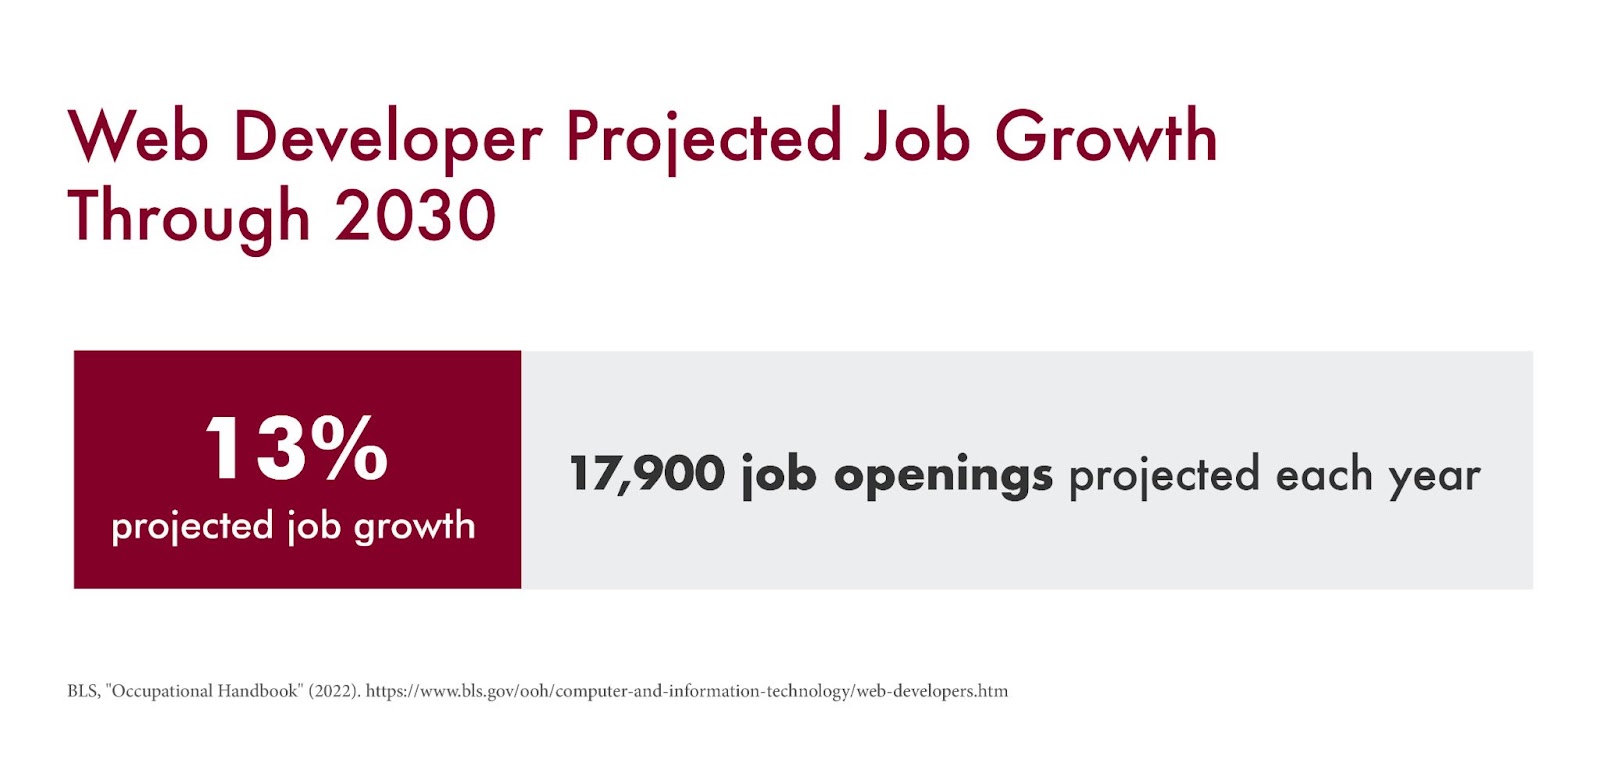 A chart that highlights the projected job growth and job openings for web developers through 2030.